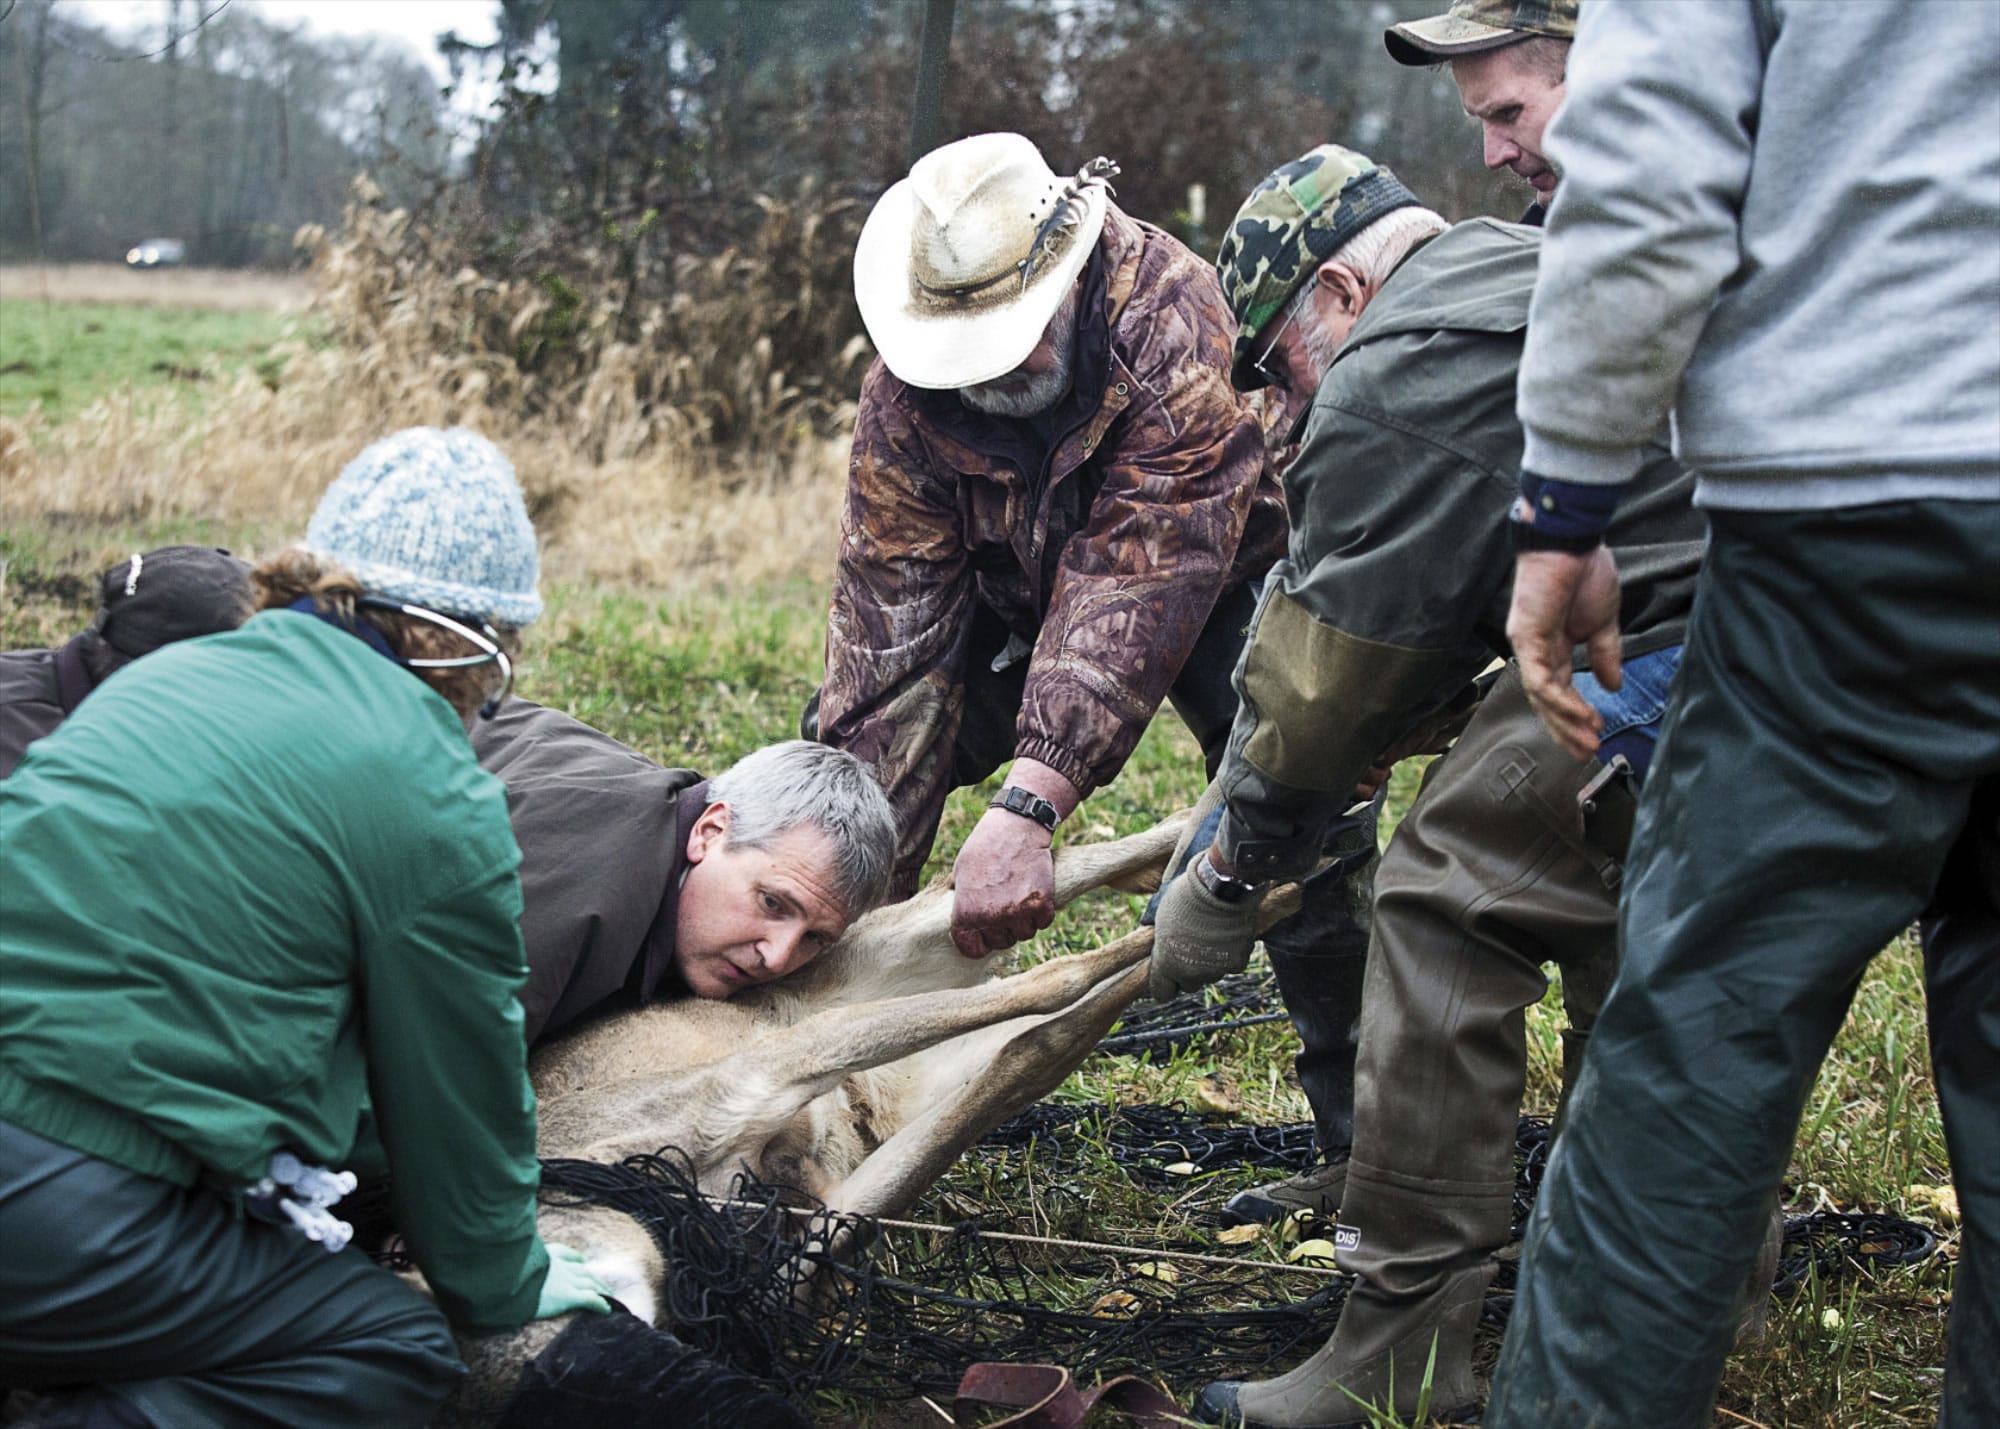 With support from a veterinarian and volunteers, head biologist Paul Meyers works quickly to untangle a deer from a drop-net at the Julia Butler Hansen National Wildlife Refuge for Columbian White-tailed deer in Cathlamet on Tuesday.